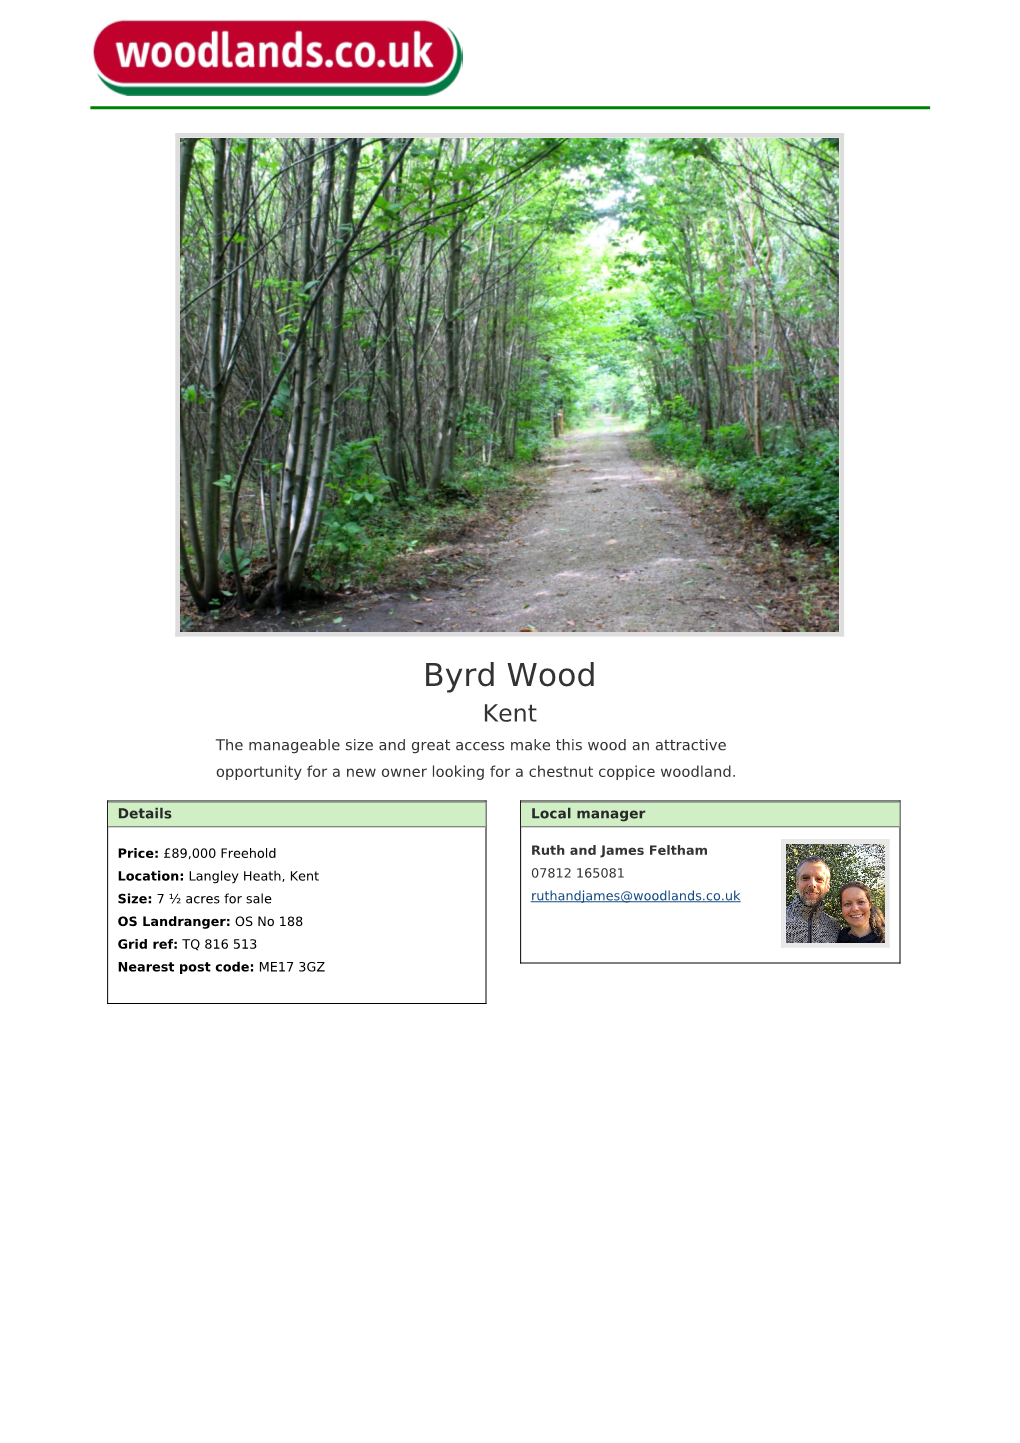 Byrd Wood Kent the Manageable Size and Great Access Make This Wood an Attractive Opportunity for a New Owner Looking for a Chestnut Coppice Woodland